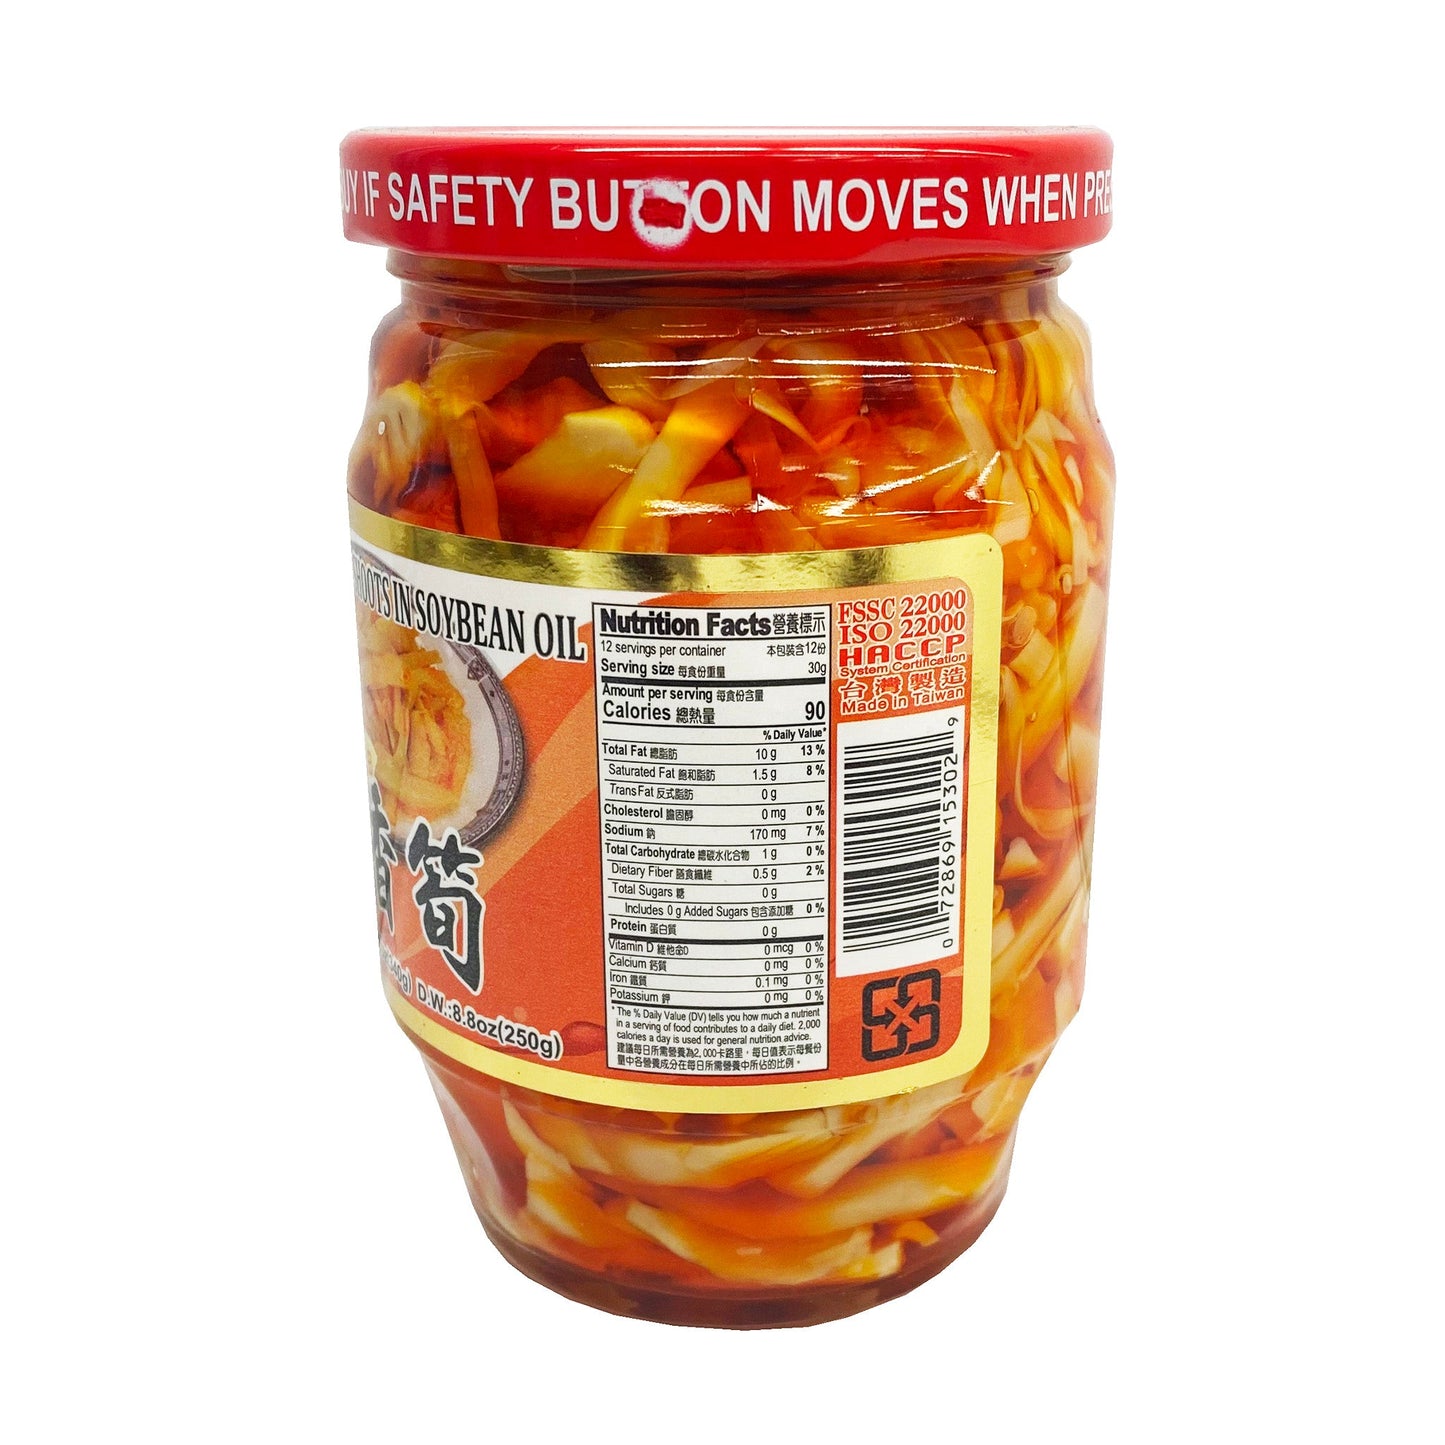 Back graphic image of Wei Chuan Chili Bamboo Shoots in Soybean Oil 12oz